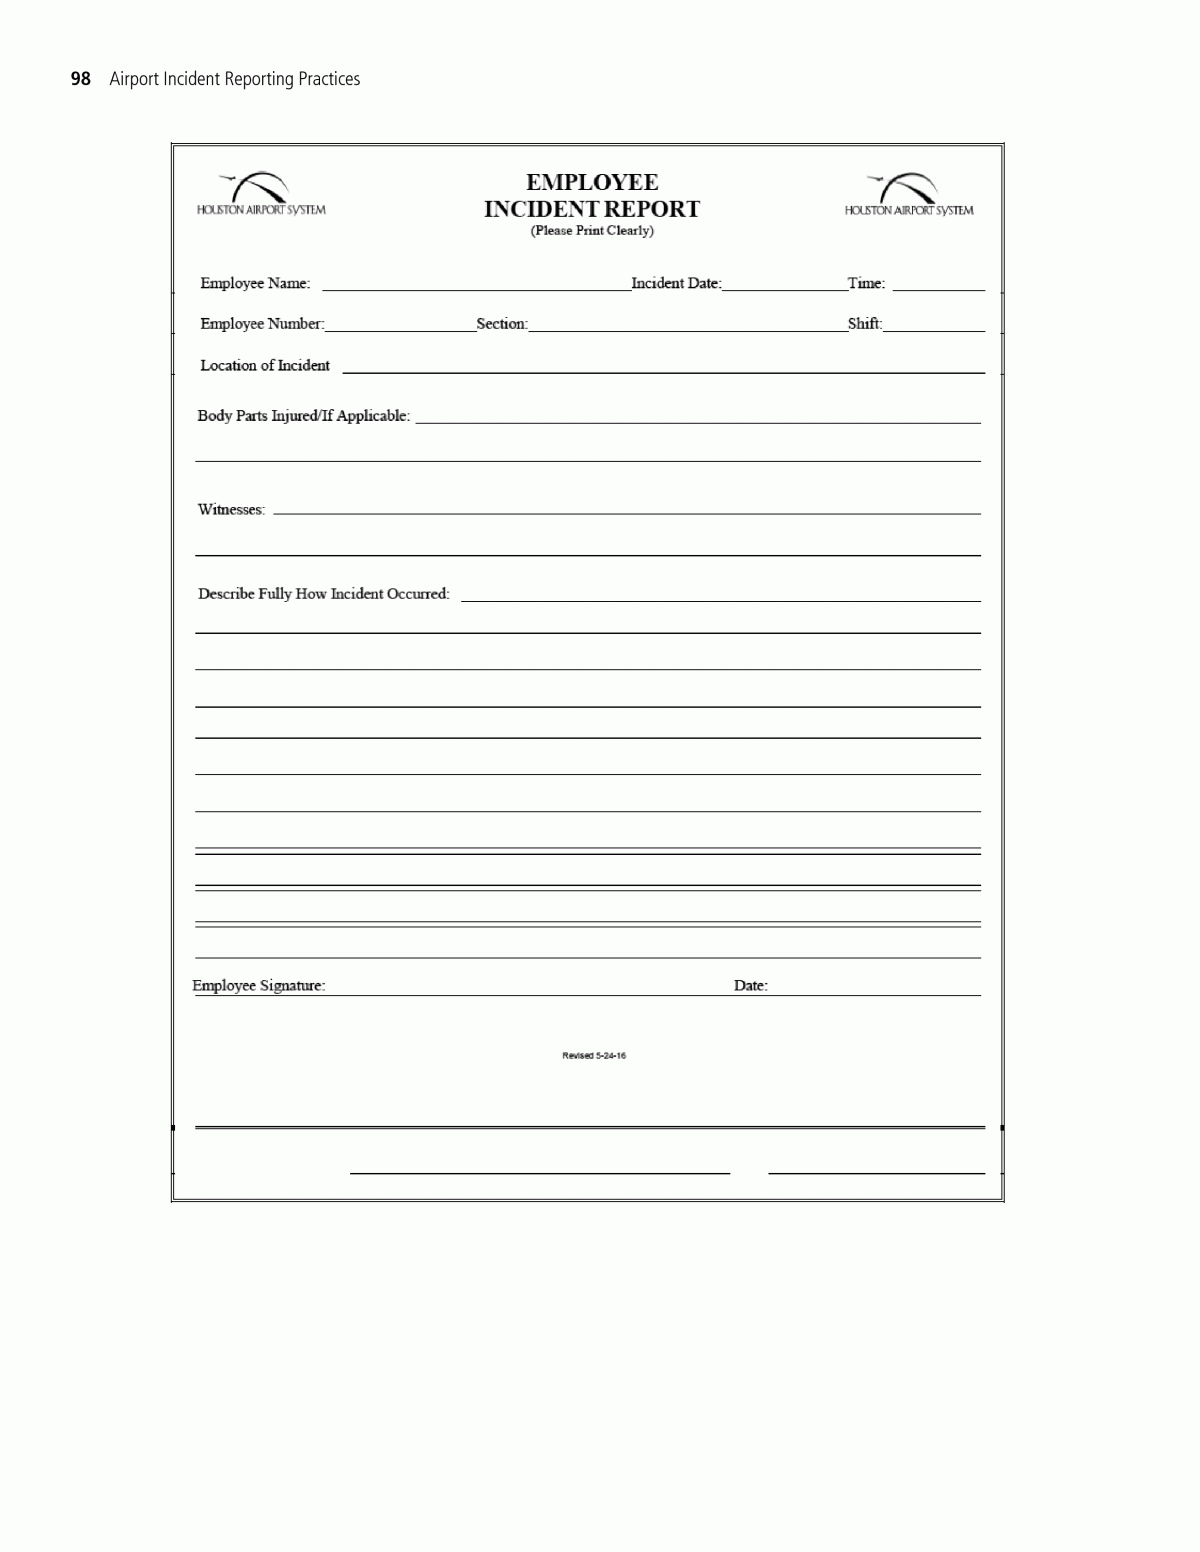 Appendix H - Sample Employee Incident Report Form | Airport Intended For Customer Incident Report Form Template